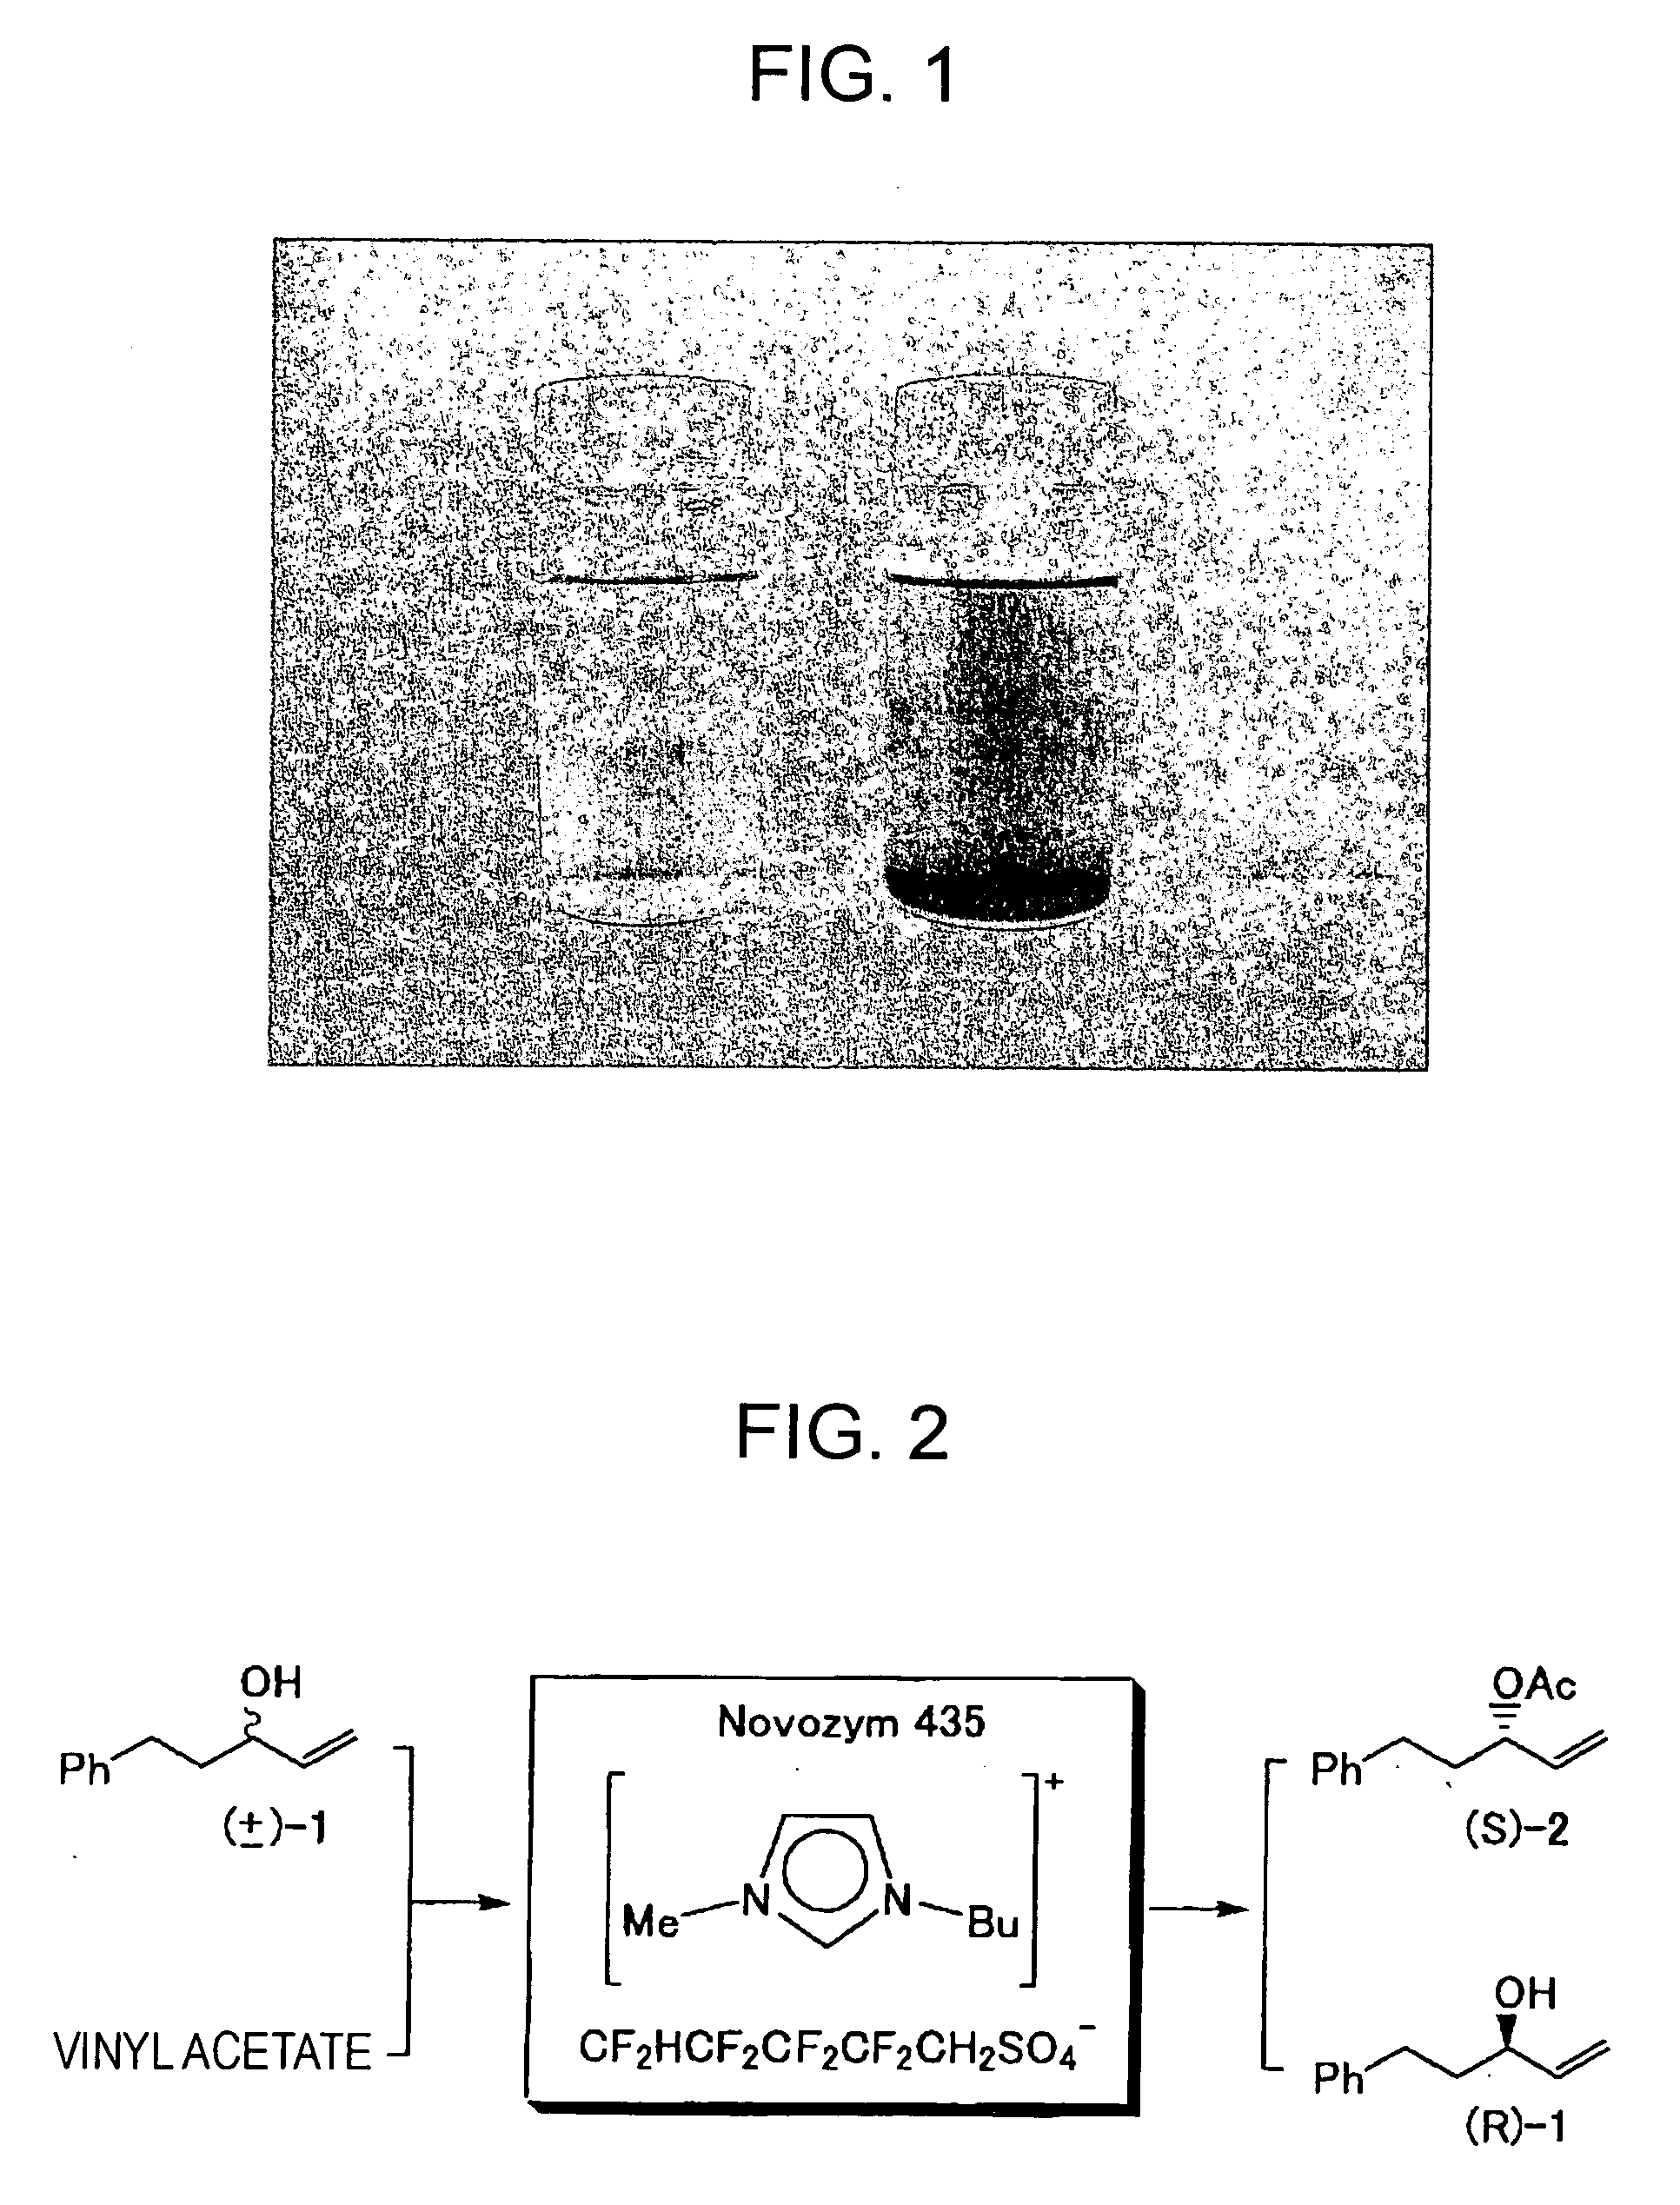 Ionic Liquid and Process for Producing the Same